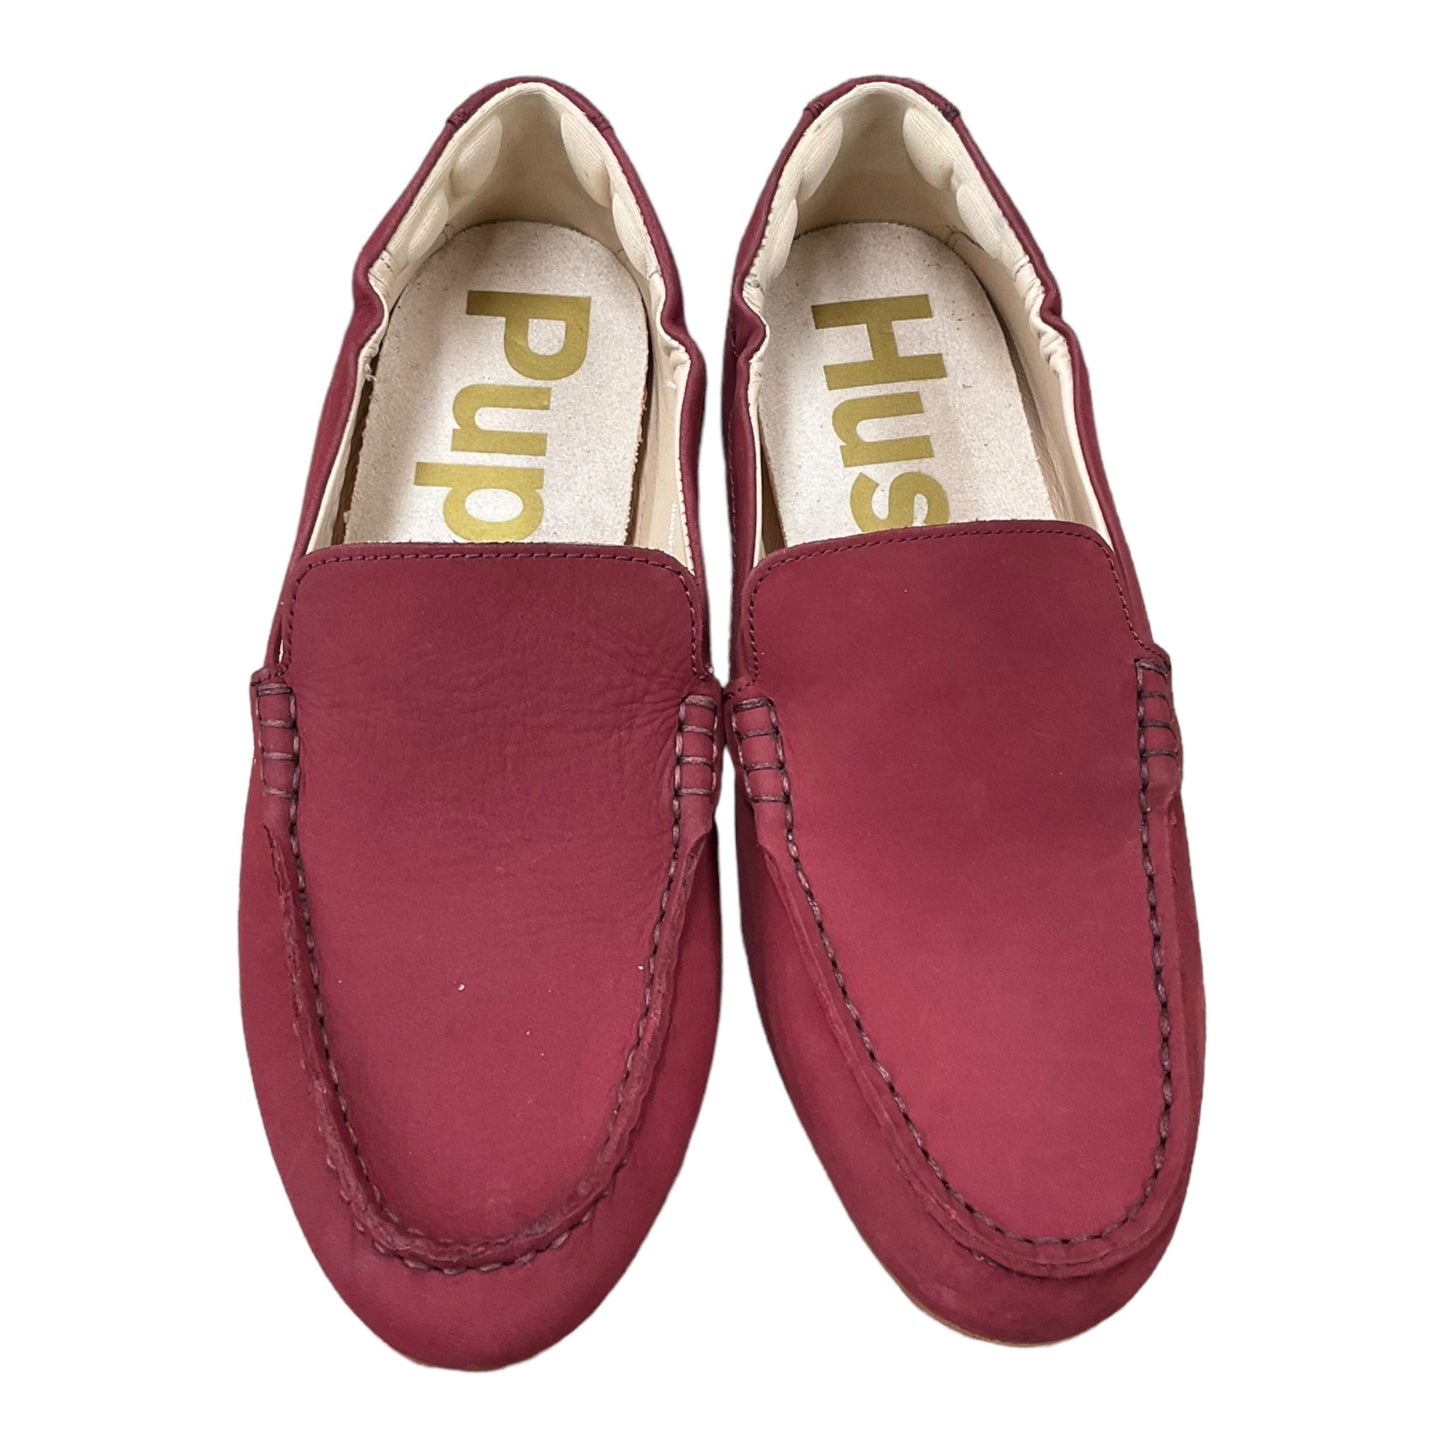 Shoes Flats Loafer Oxford By Hush Puppies  Size: 6.5